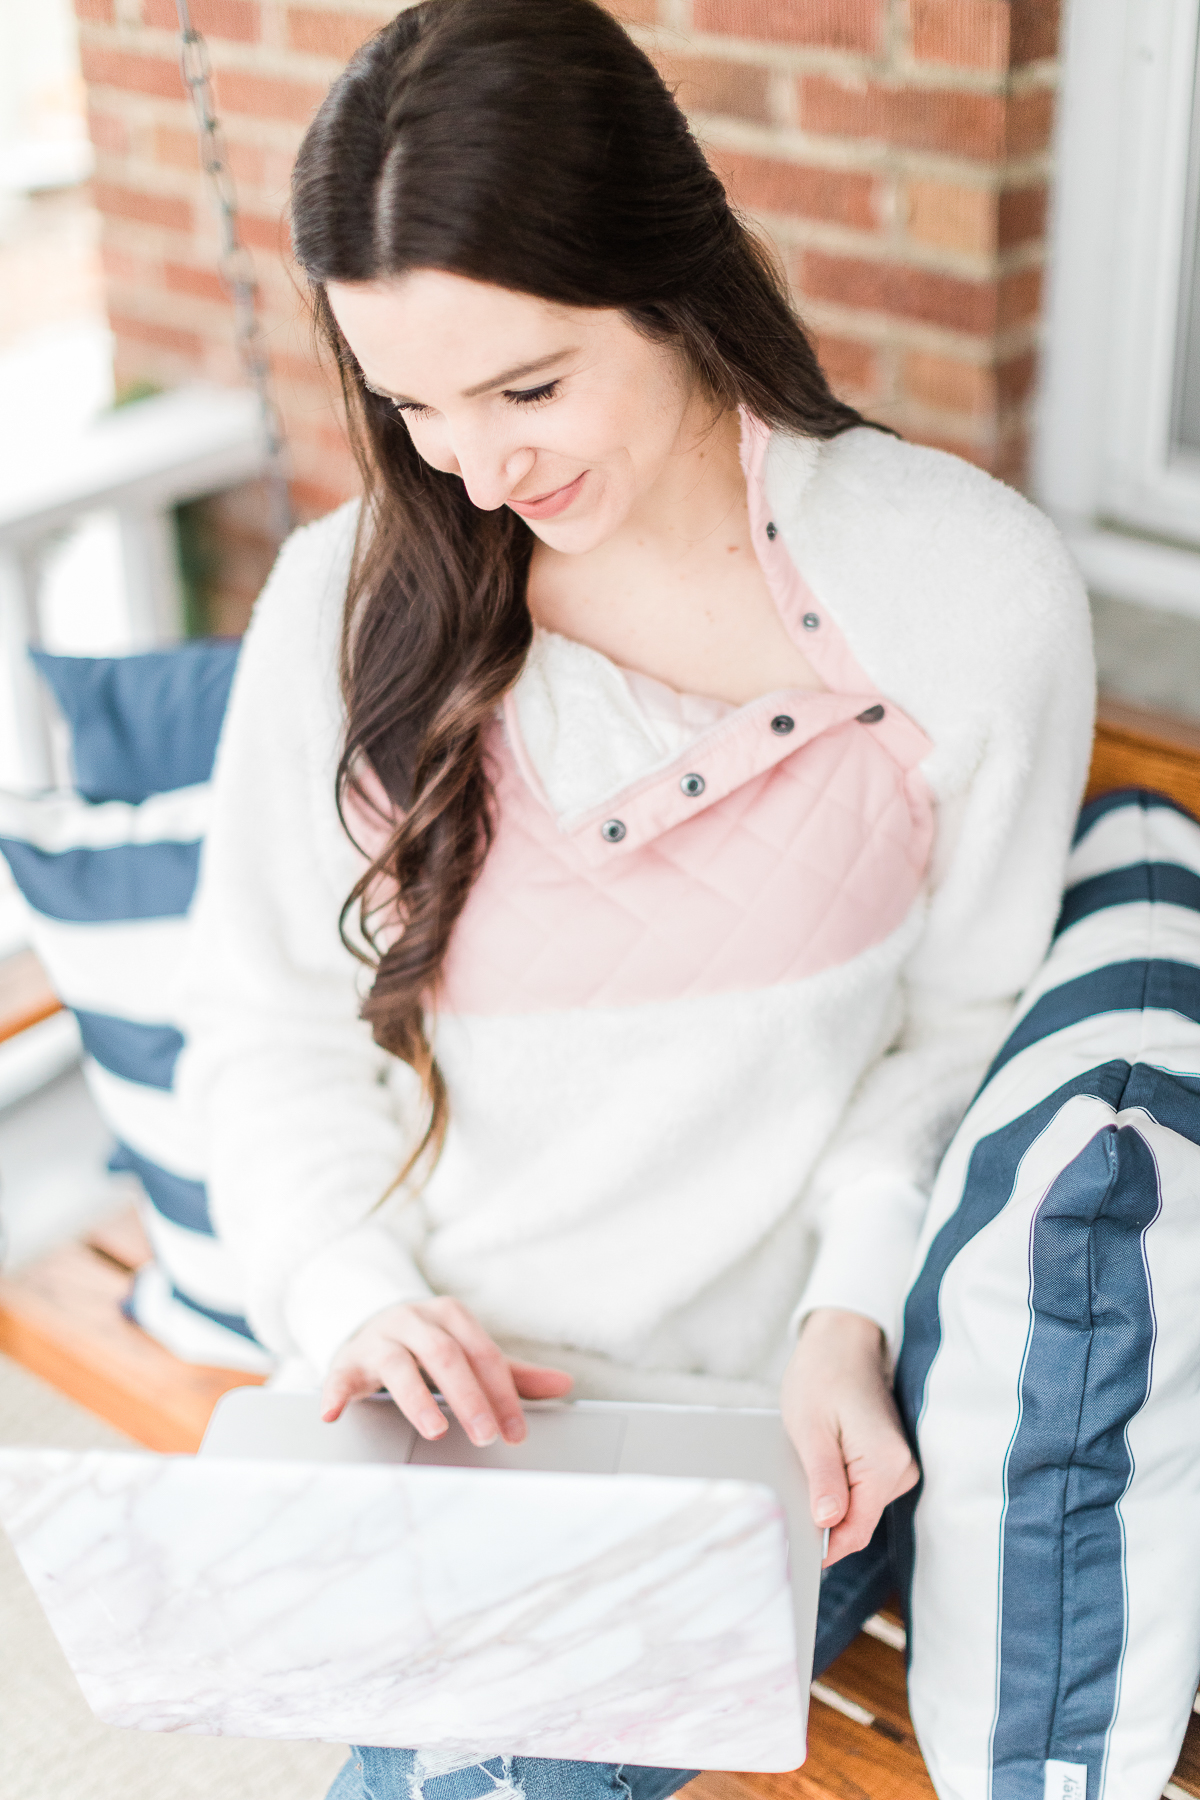 Lifestyle Blogging Tips: 10 Blogging Mistakes I Wish I Could Take Back by southern lifestyle blogger Stephanie Ziajka from Diary of a Debutante